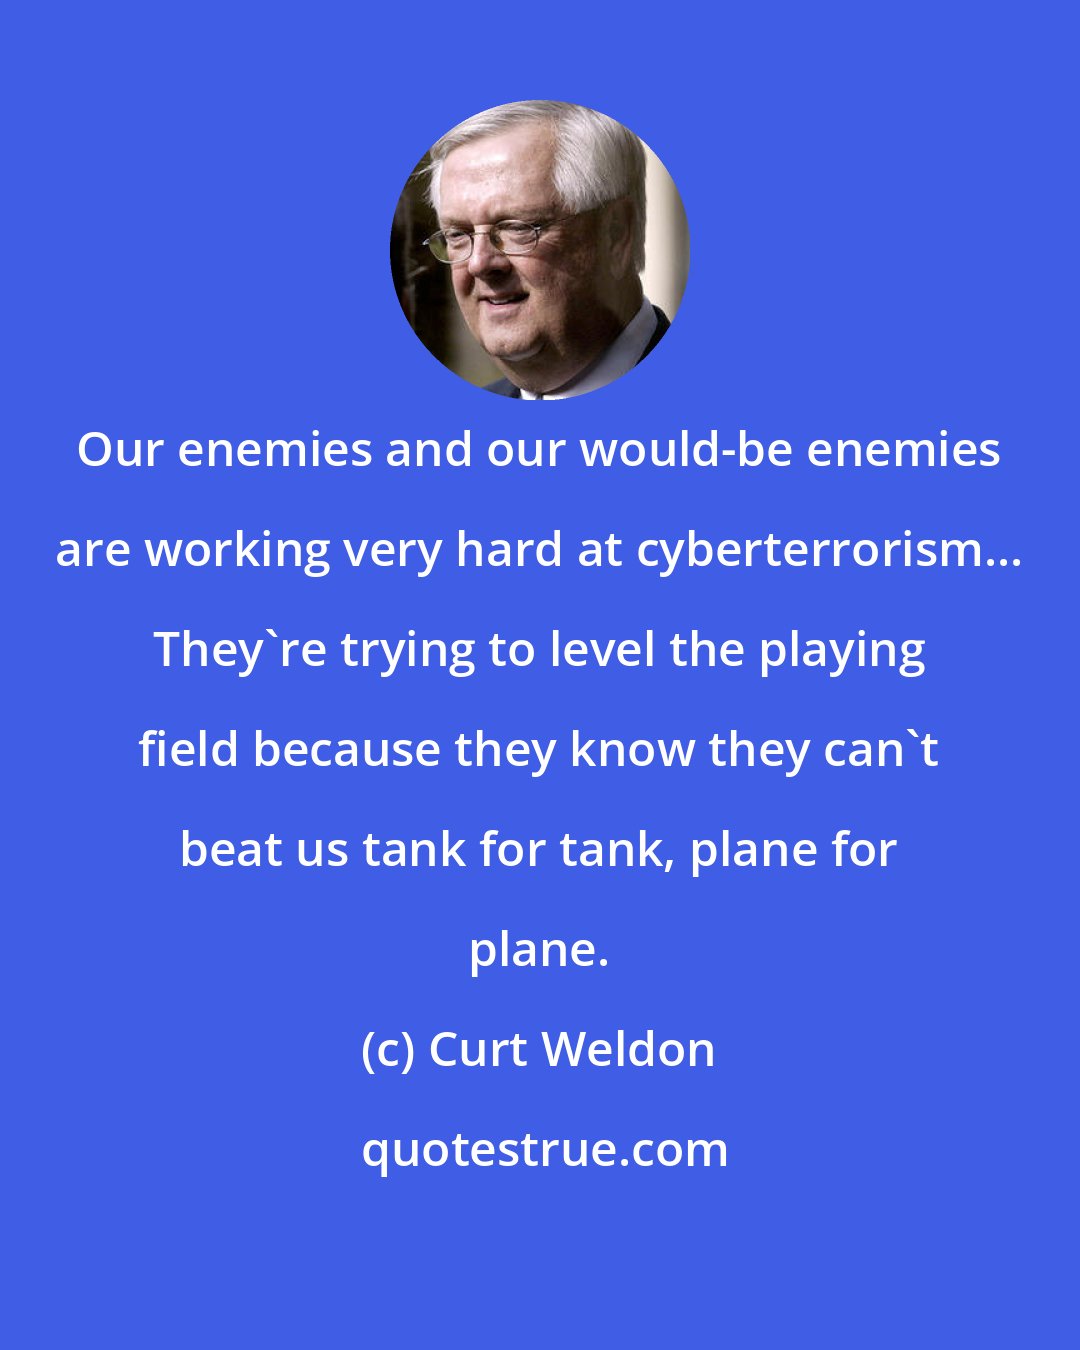 Curt Weldon: Our enemies and our would-be enemies are working very hard at cyberterrorism... They're trying to level the playing field because they know they can't beat us tank for tank, plane for plane.